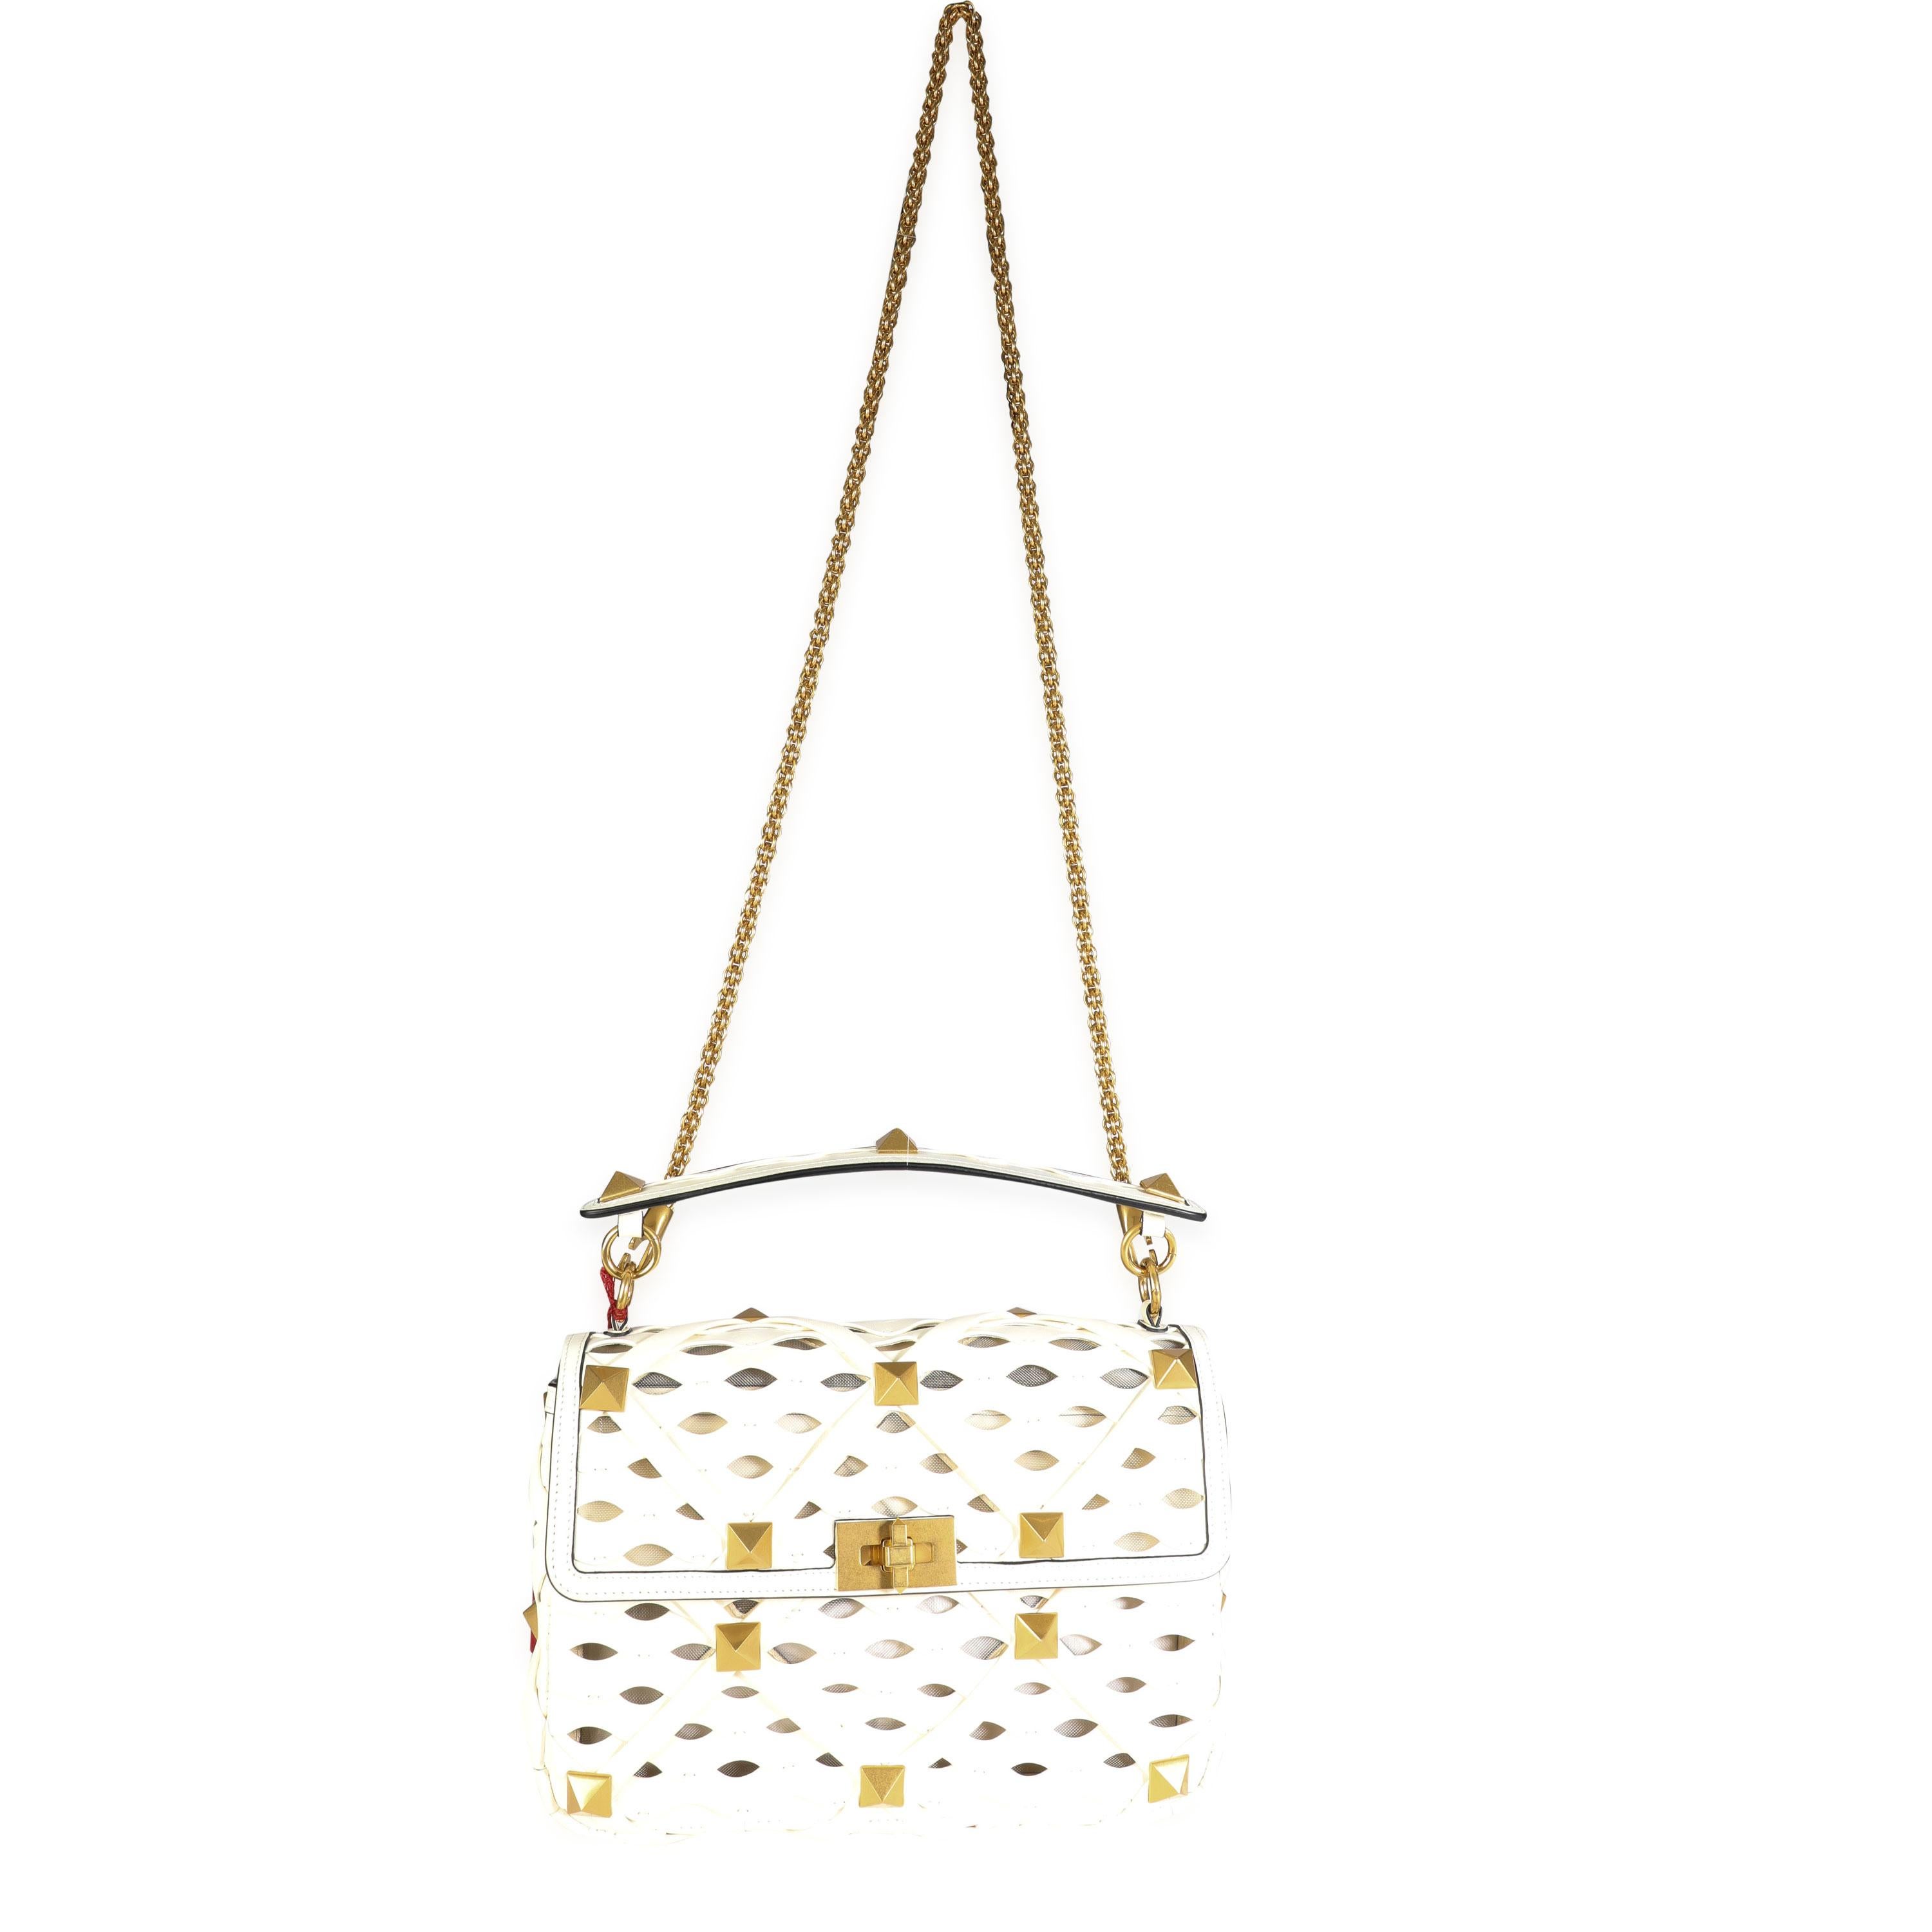 Listing Title: Valentino Ivory Nappa Leather Large Roman Stud Shoulder Bag
SKU: 117641
MSRP: 4750.00
Condition: Pre-owned (3000)
Handbag Condition: Excellent
Condition Comments: Excellent Condition. Plastic on some hardware. Faint scuffing to